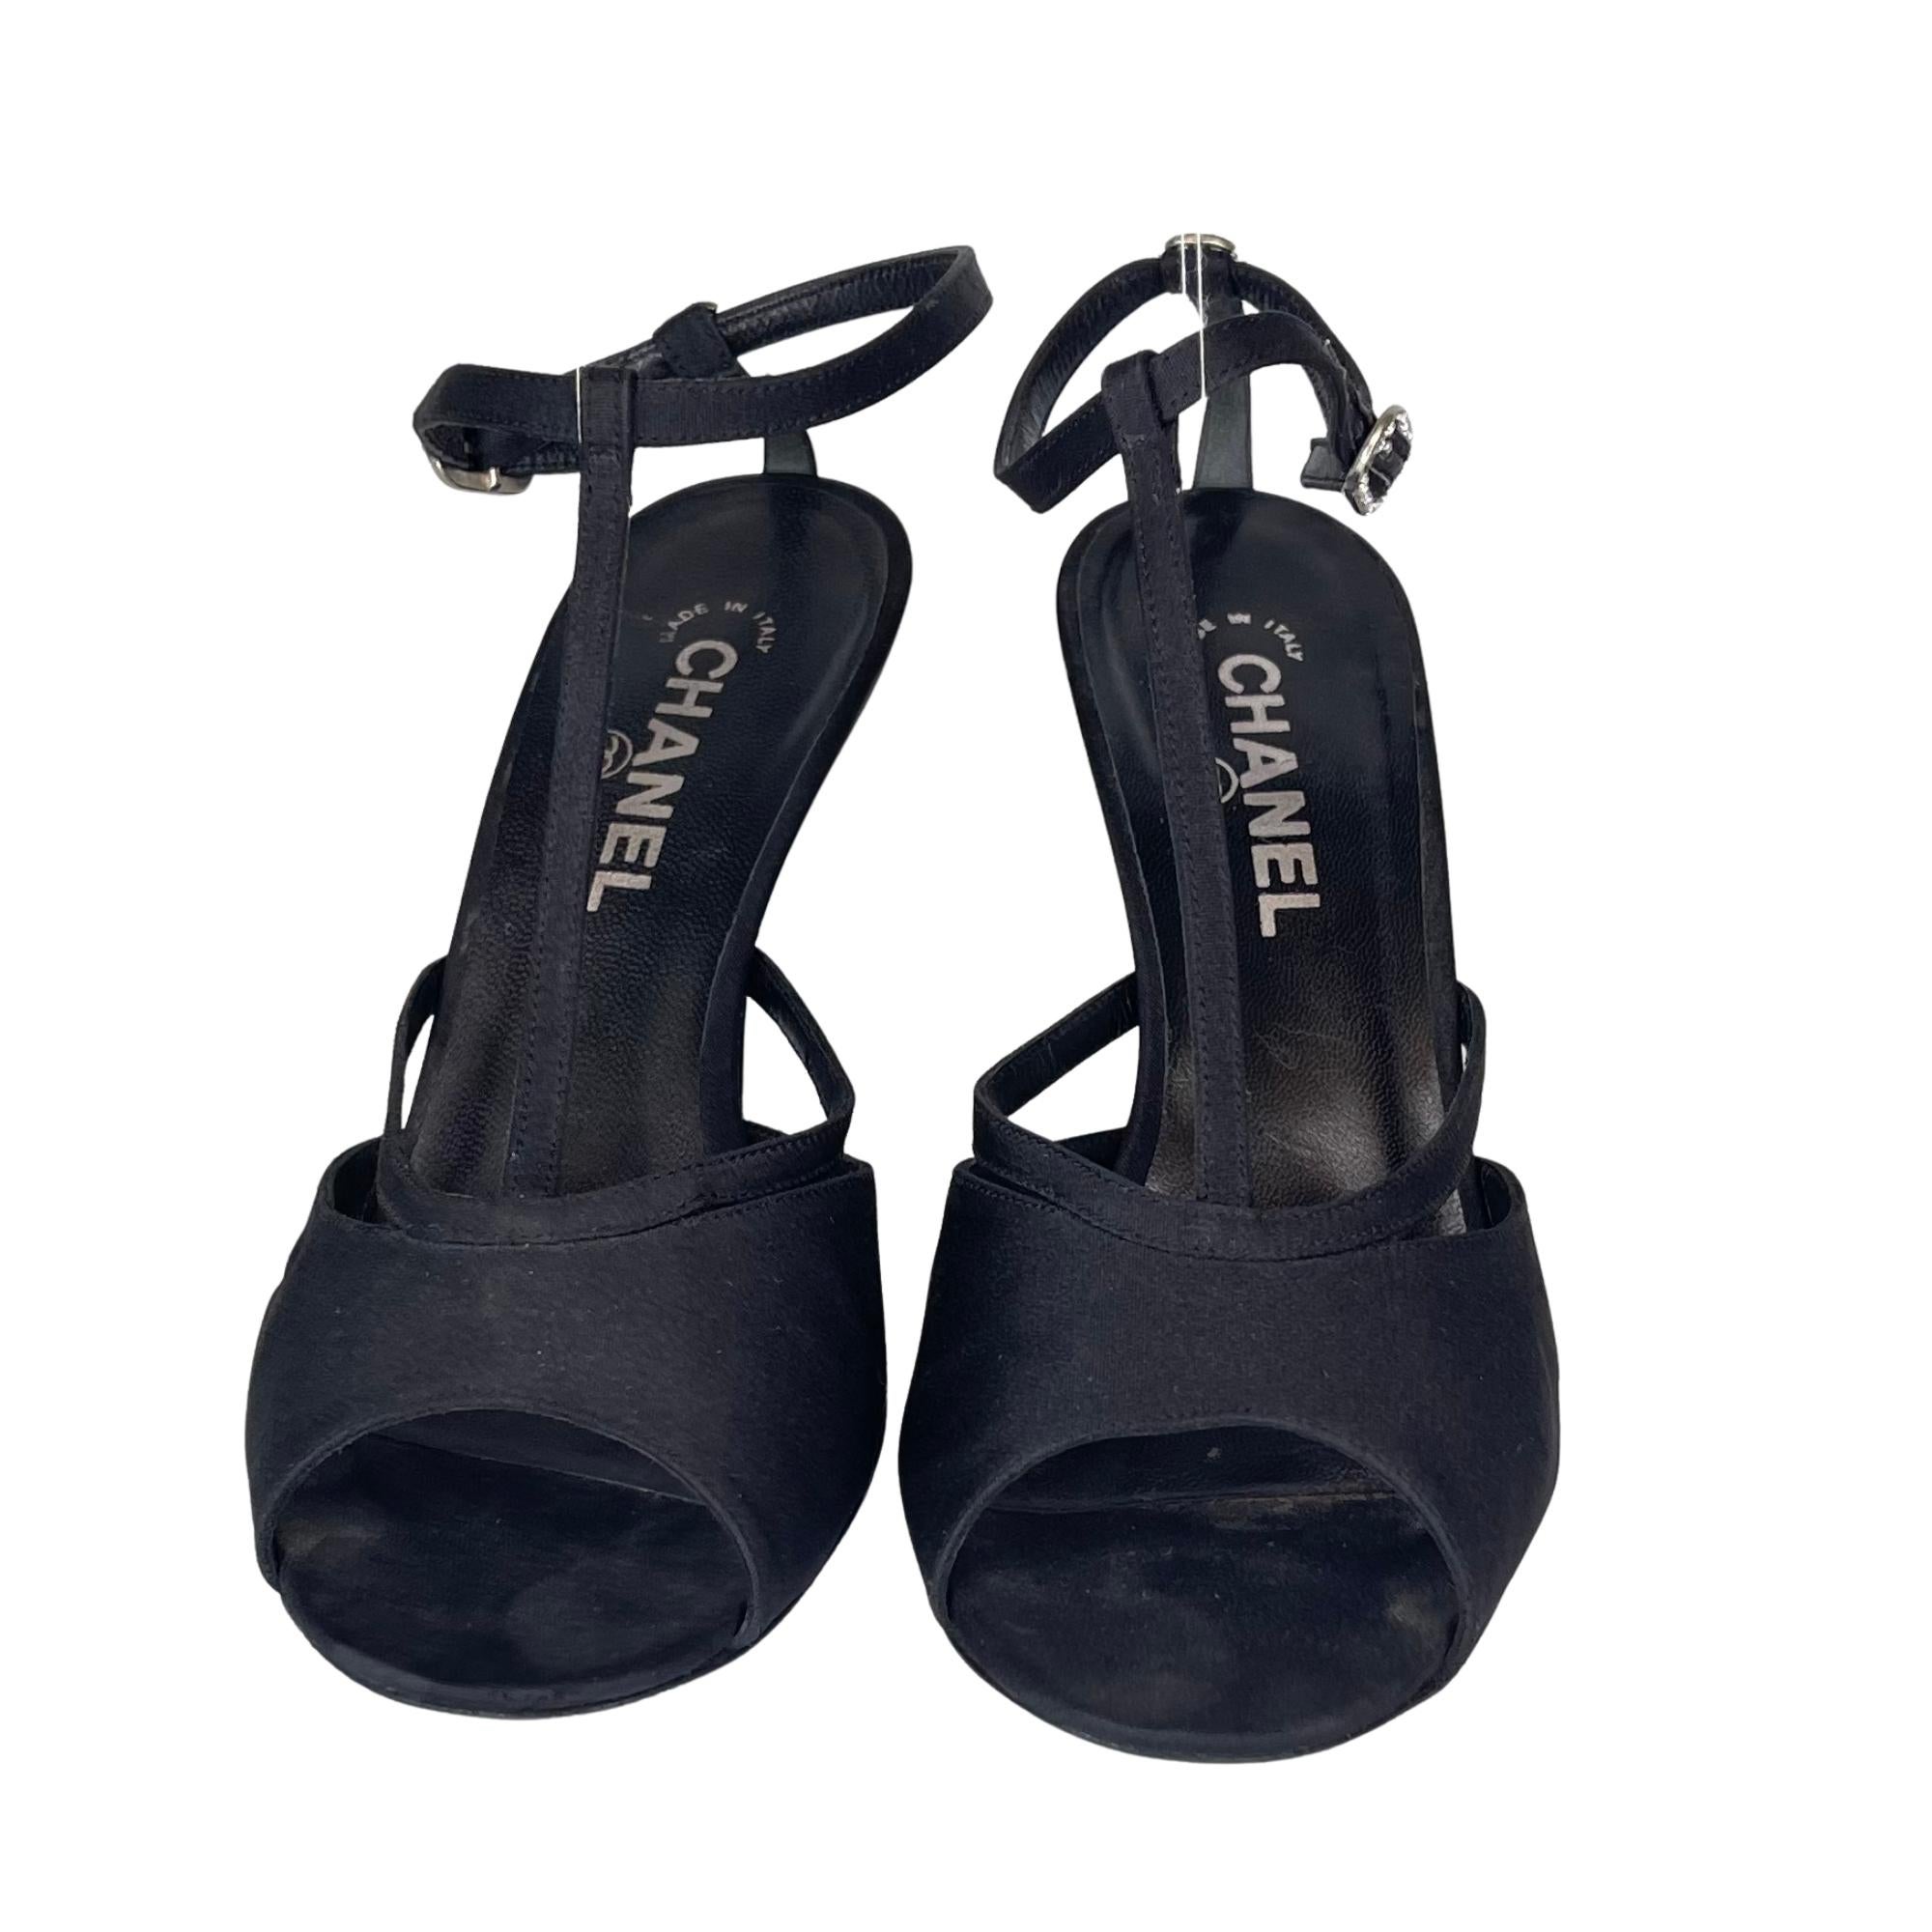 Chanel Black Suede Open Toe Sandal Pump (38.5 EU) In Excellent Condition For Sale In Montreal, Quebec